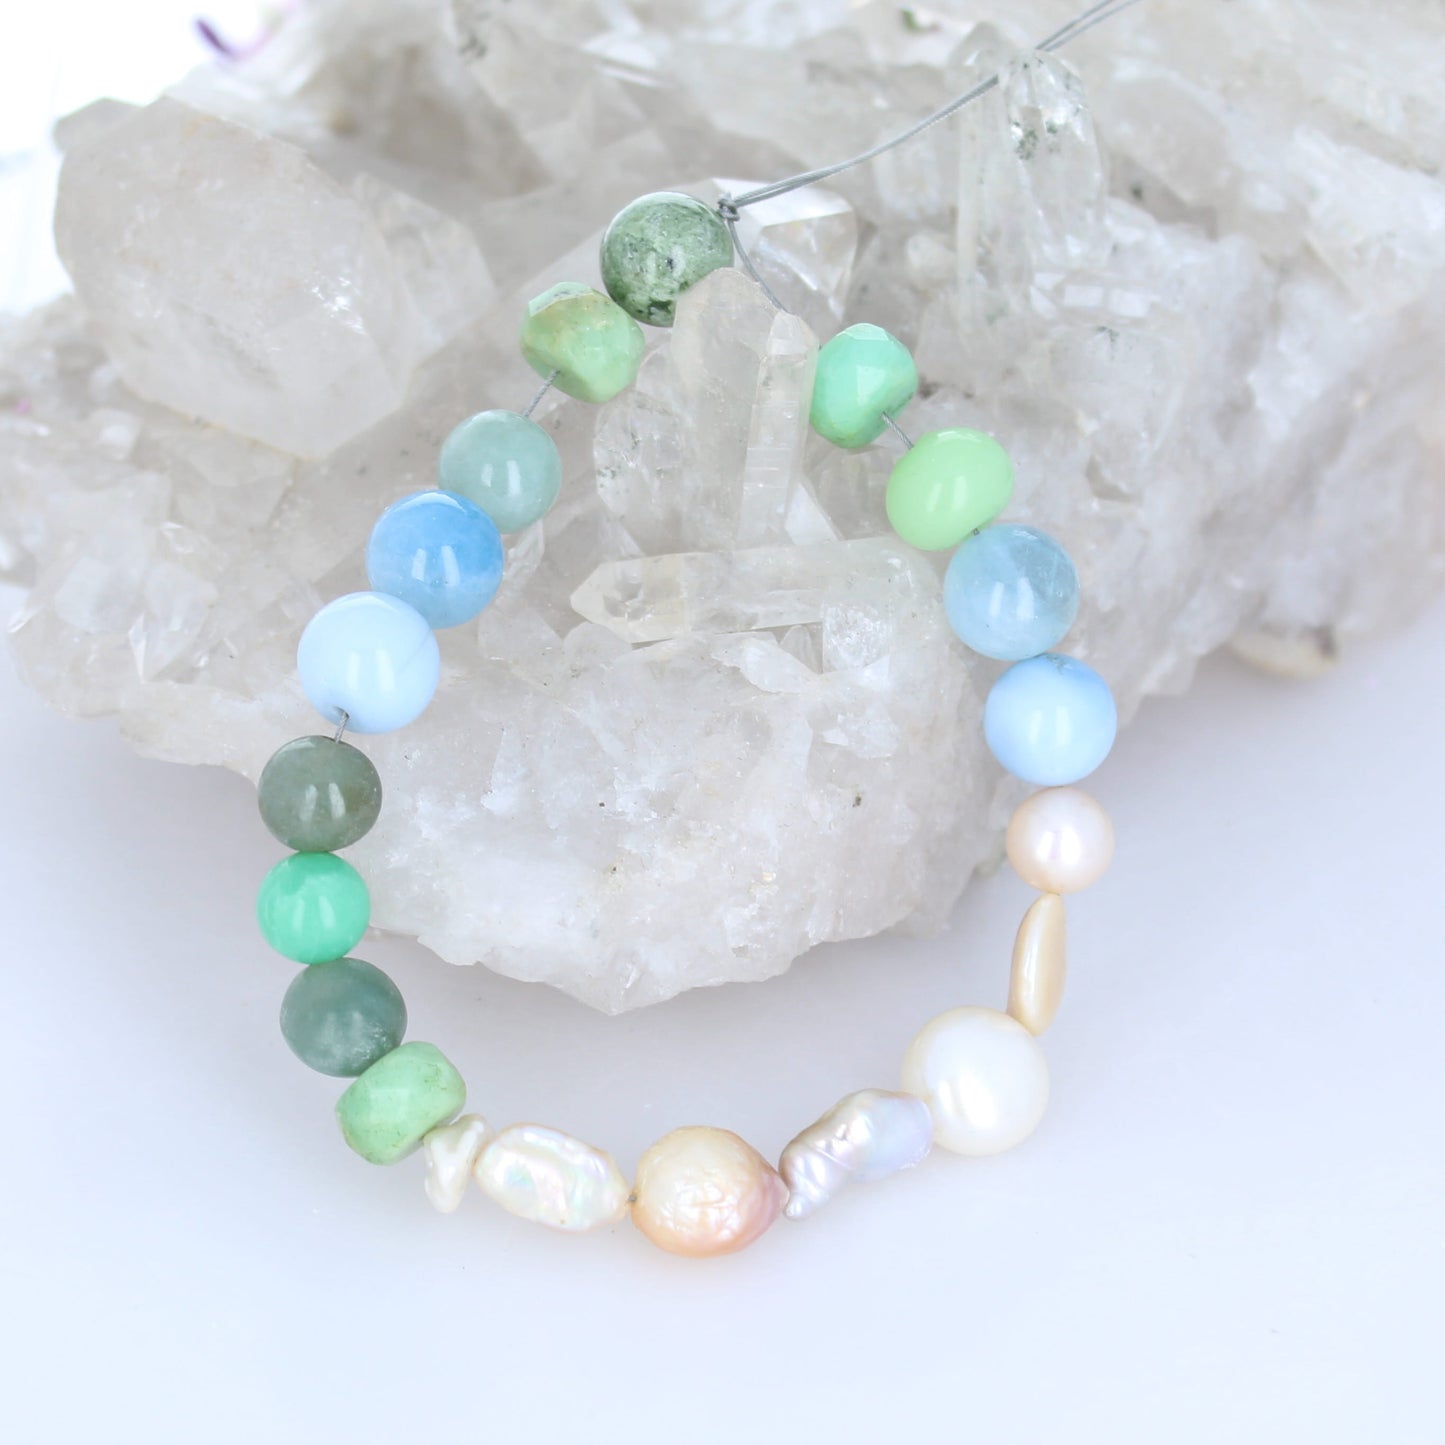 Pretty Spring Mixed Beads Chrysoprase, Pearl, Aquamarines 6.75"